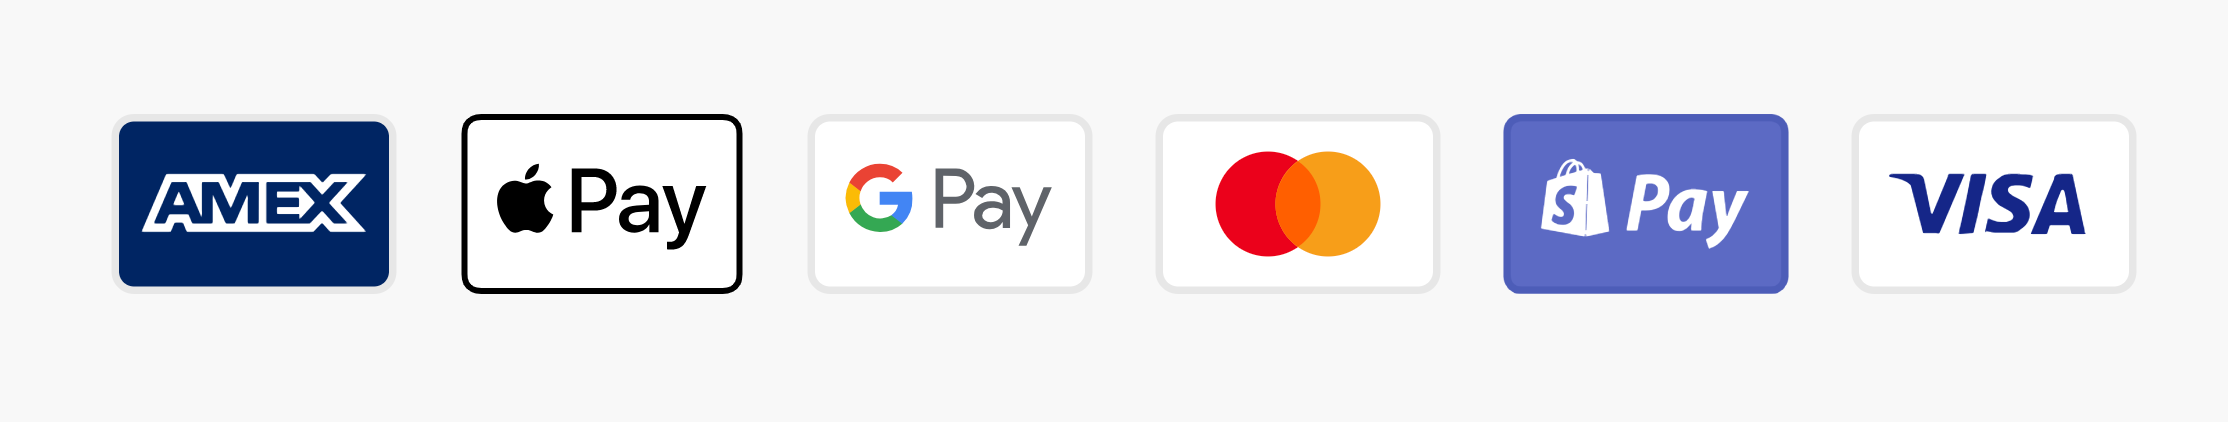 files/Footer_payment_icons.png